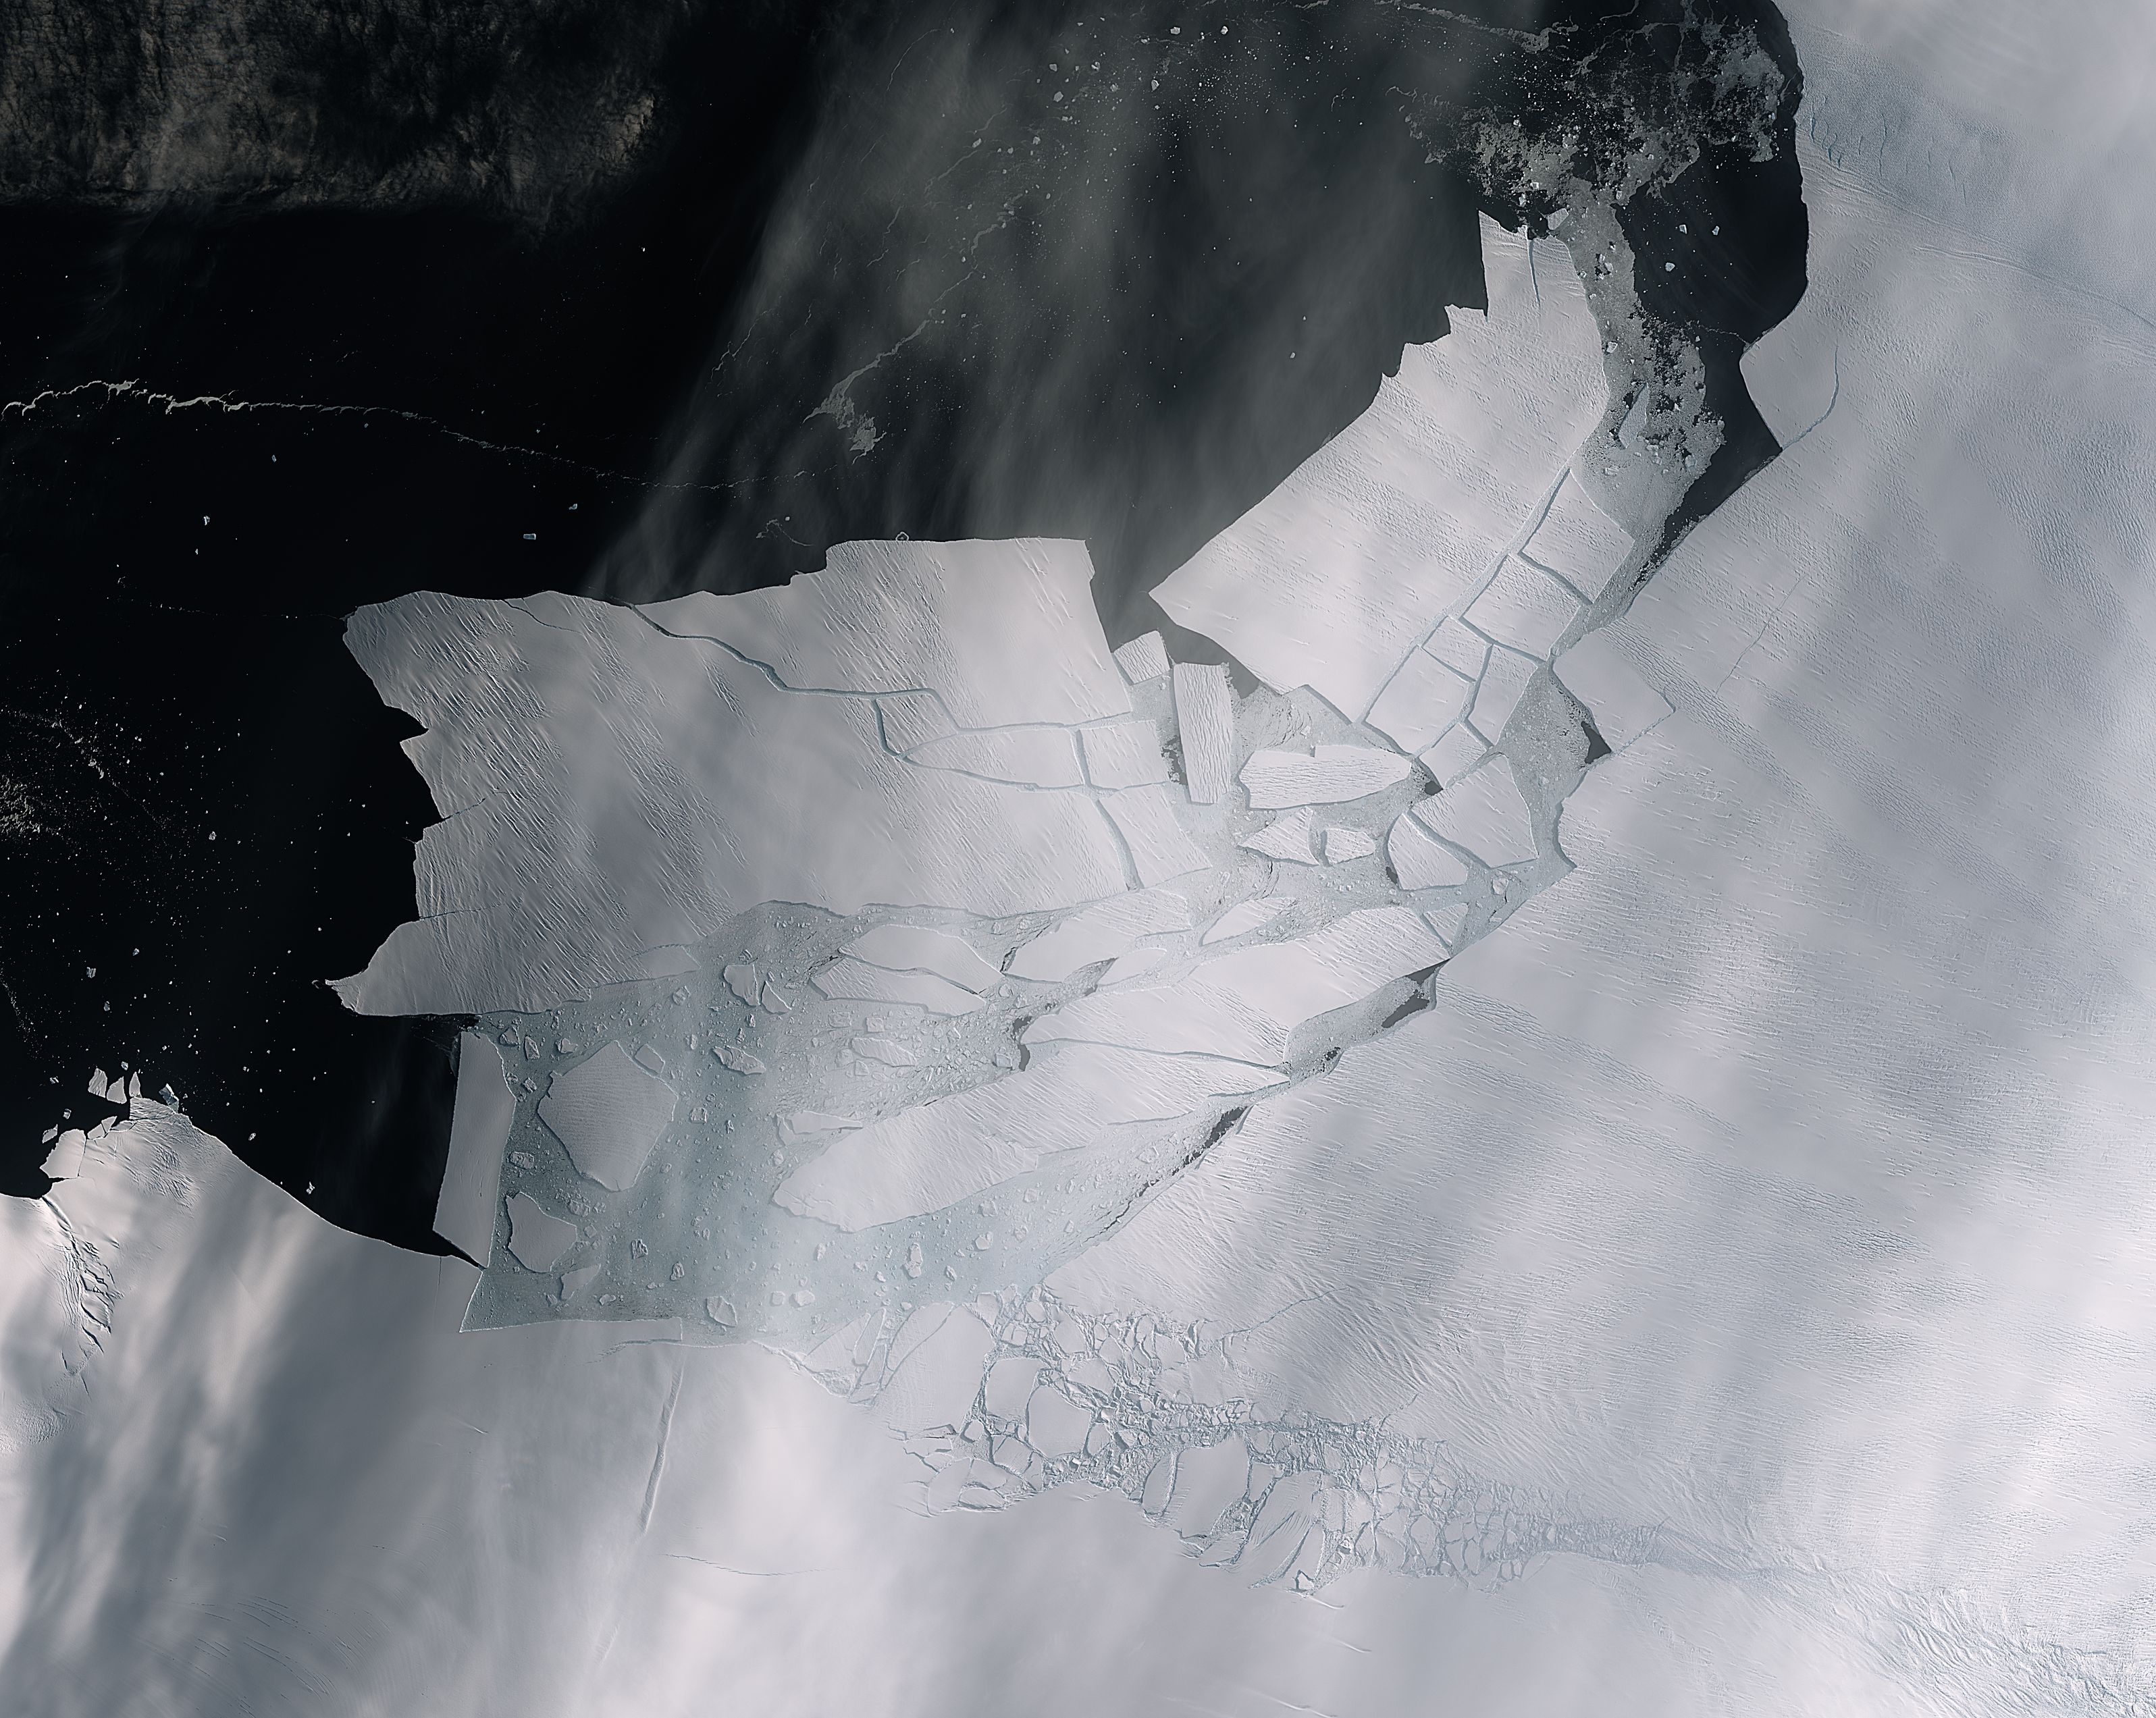 huge Antarctic Glacier is melting the most at 5500 years